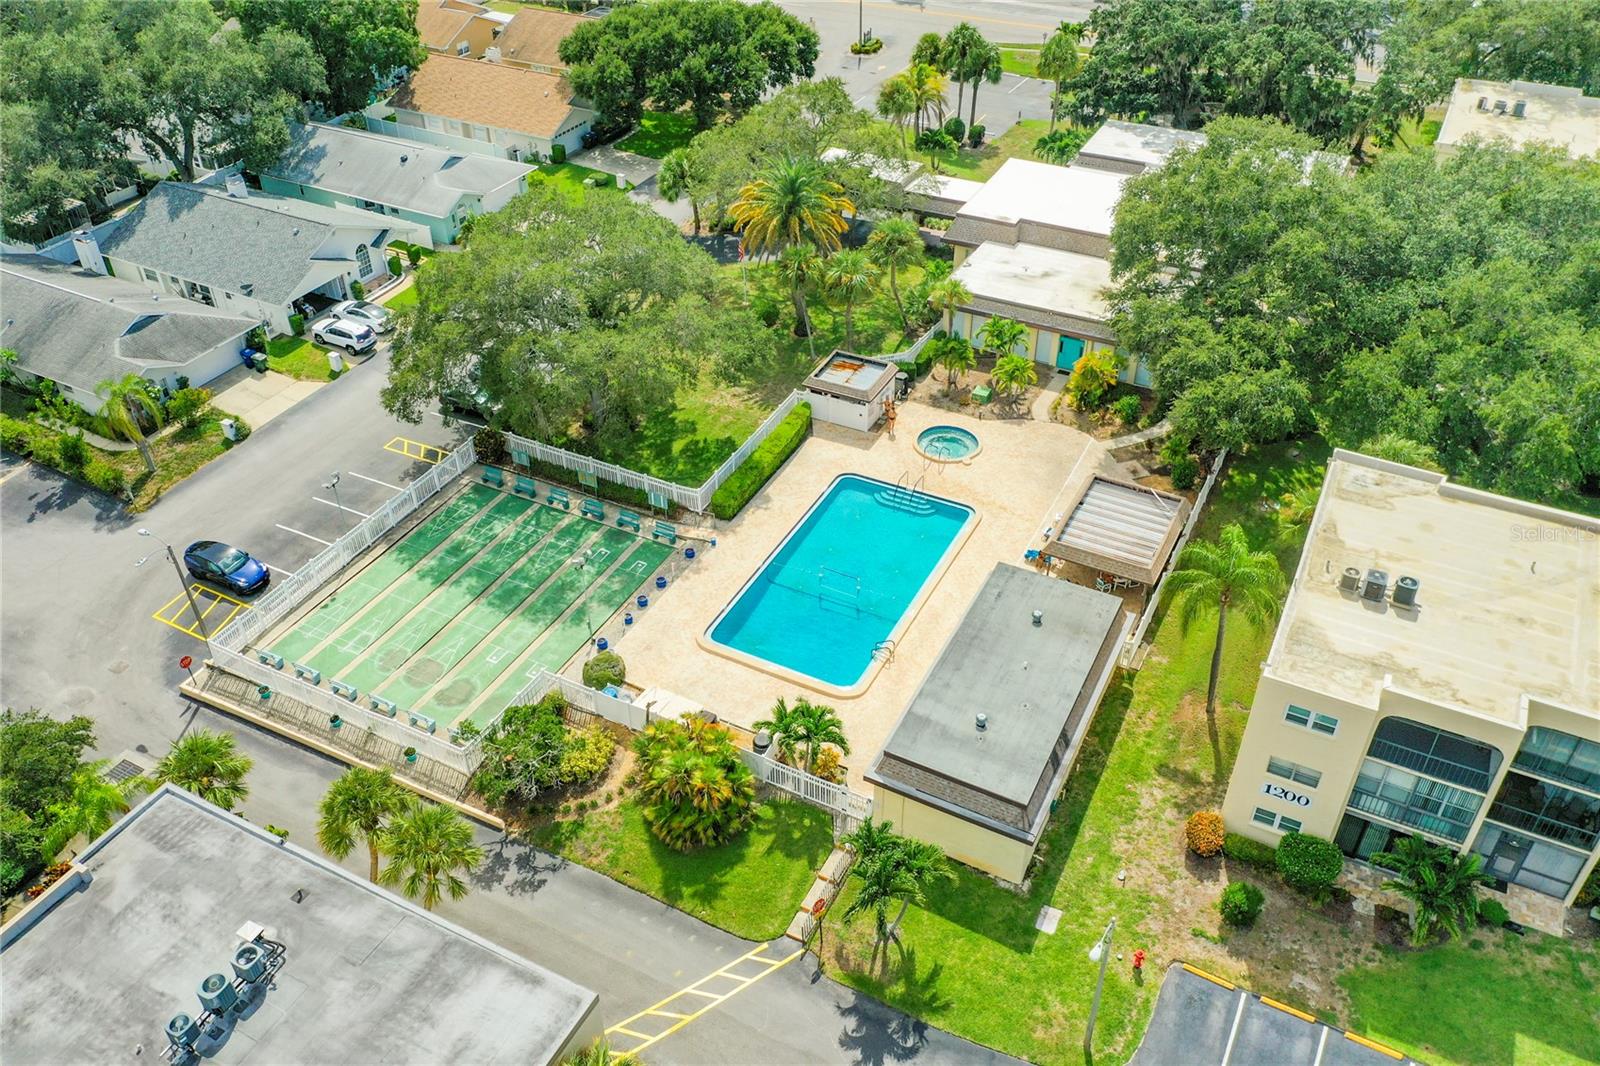 Large community pool and shuffleboard courts